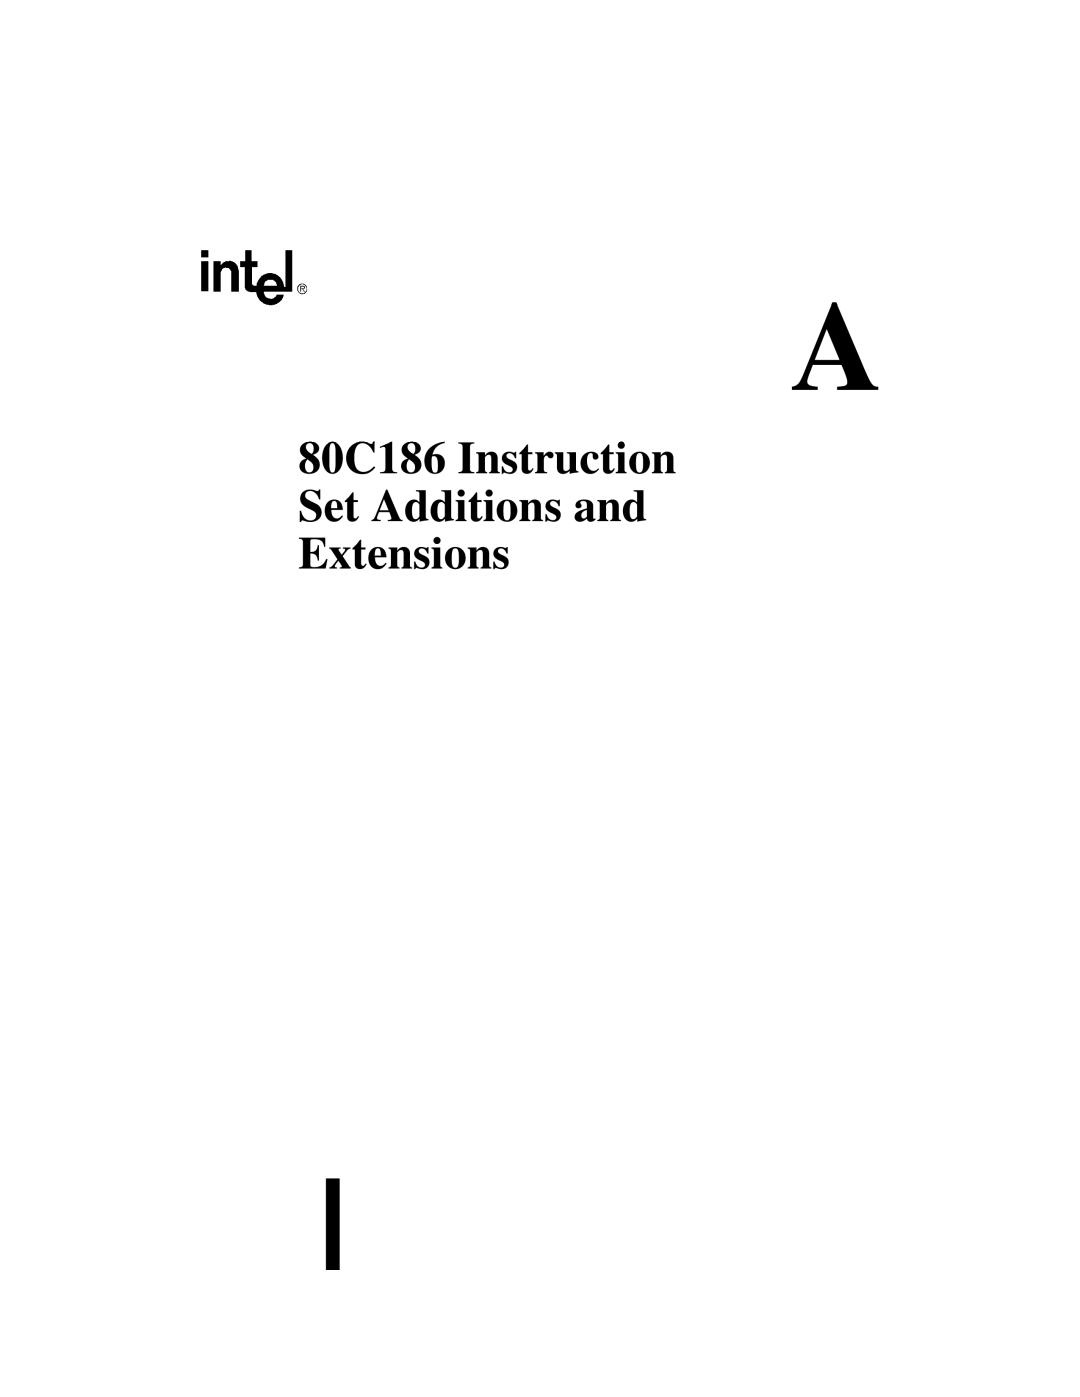 Intel 80C188XL, 80C186XL user manual 80C186 Instruction Set Additions and Extensions 